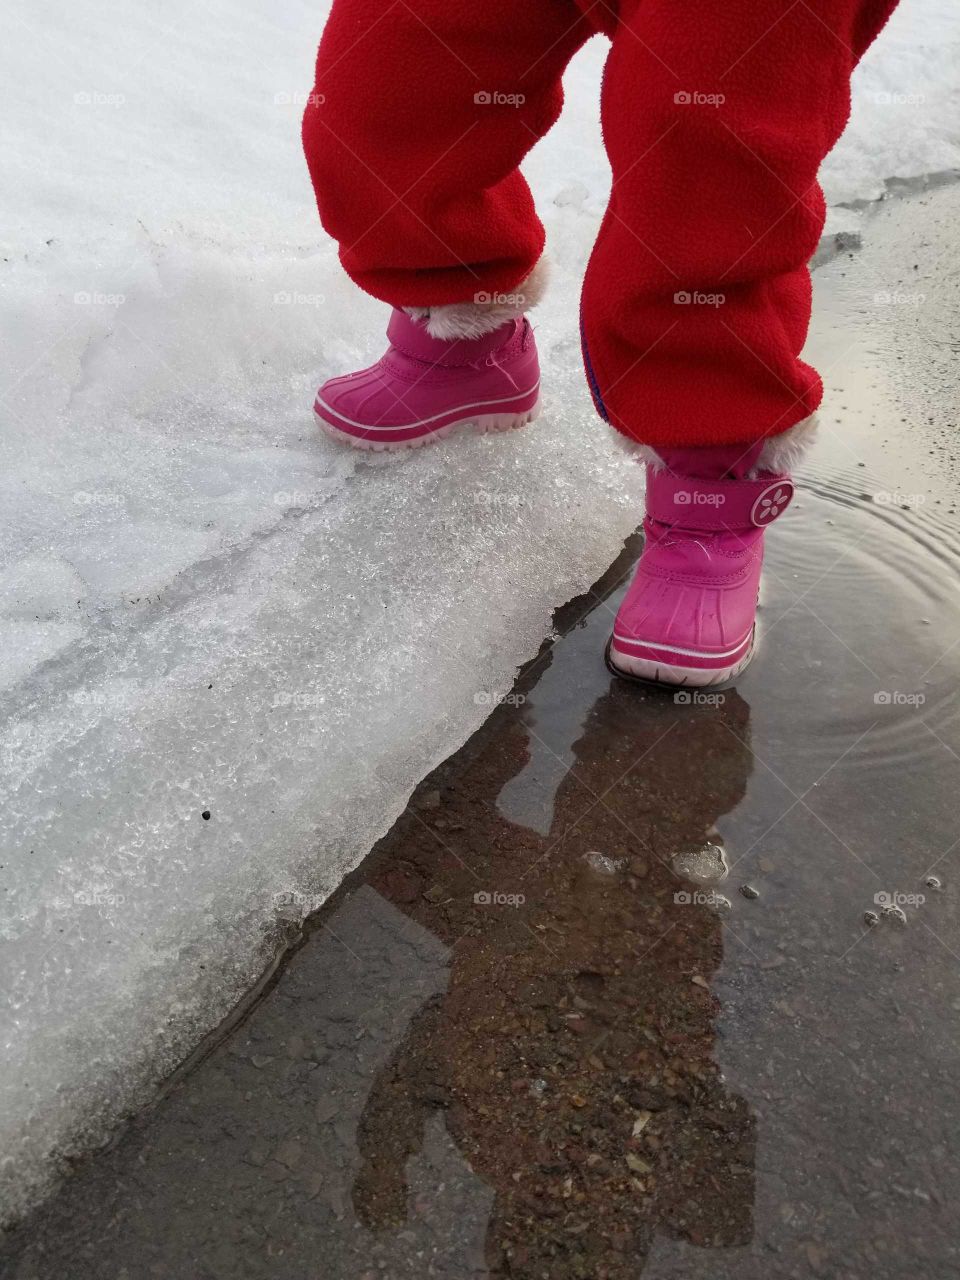 stepping into spring,  spring runoff, melt that snow, melting snow, fun playing in puddles, puddle jumper, puddles are fun, exploring springtime